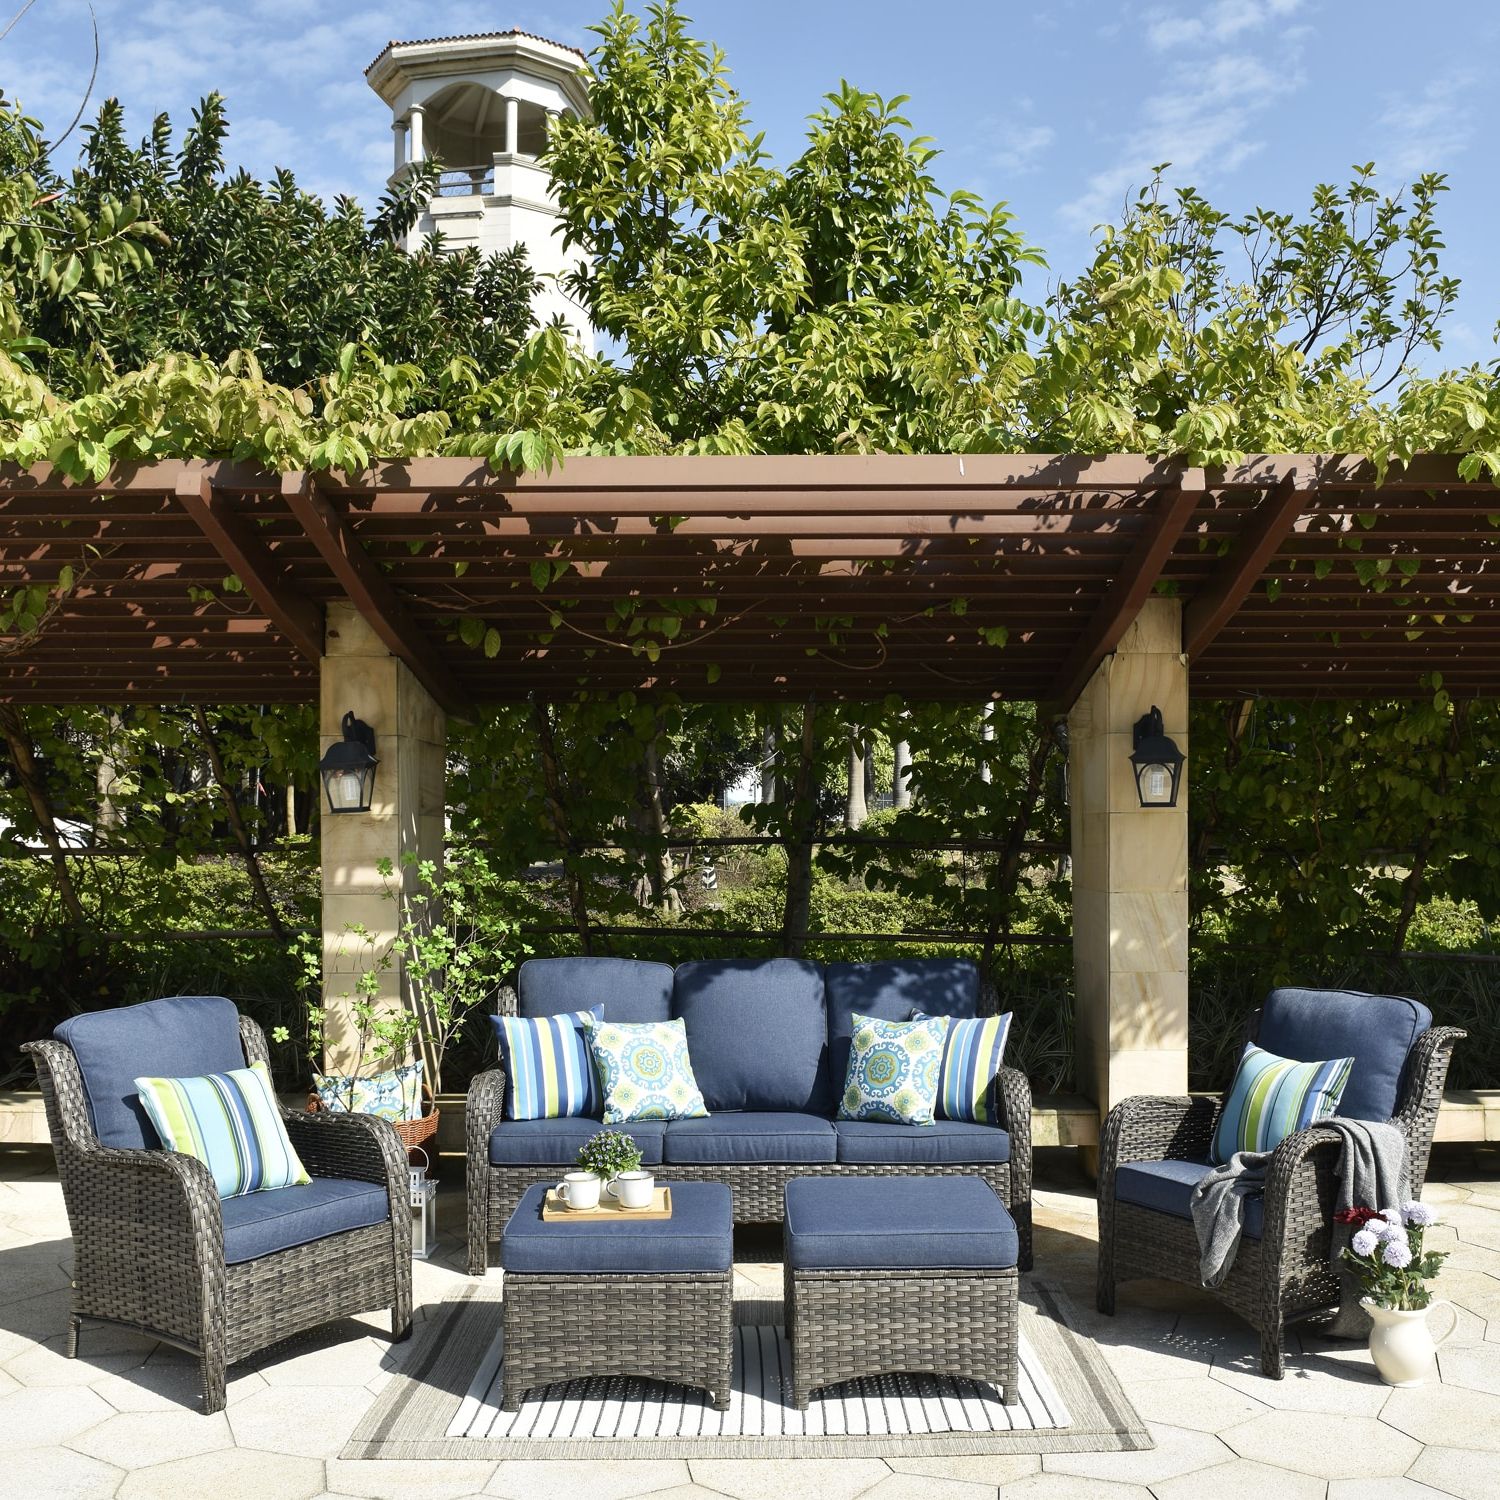 5 Piece Outdoor Patio Furniture Set Pertaining To Fashionable Ovios 5 Piece Rattan Patio Conversation Set With Blue Cushions In The Patio  Conversation Sets Department At Lowes (View 9 of 15)